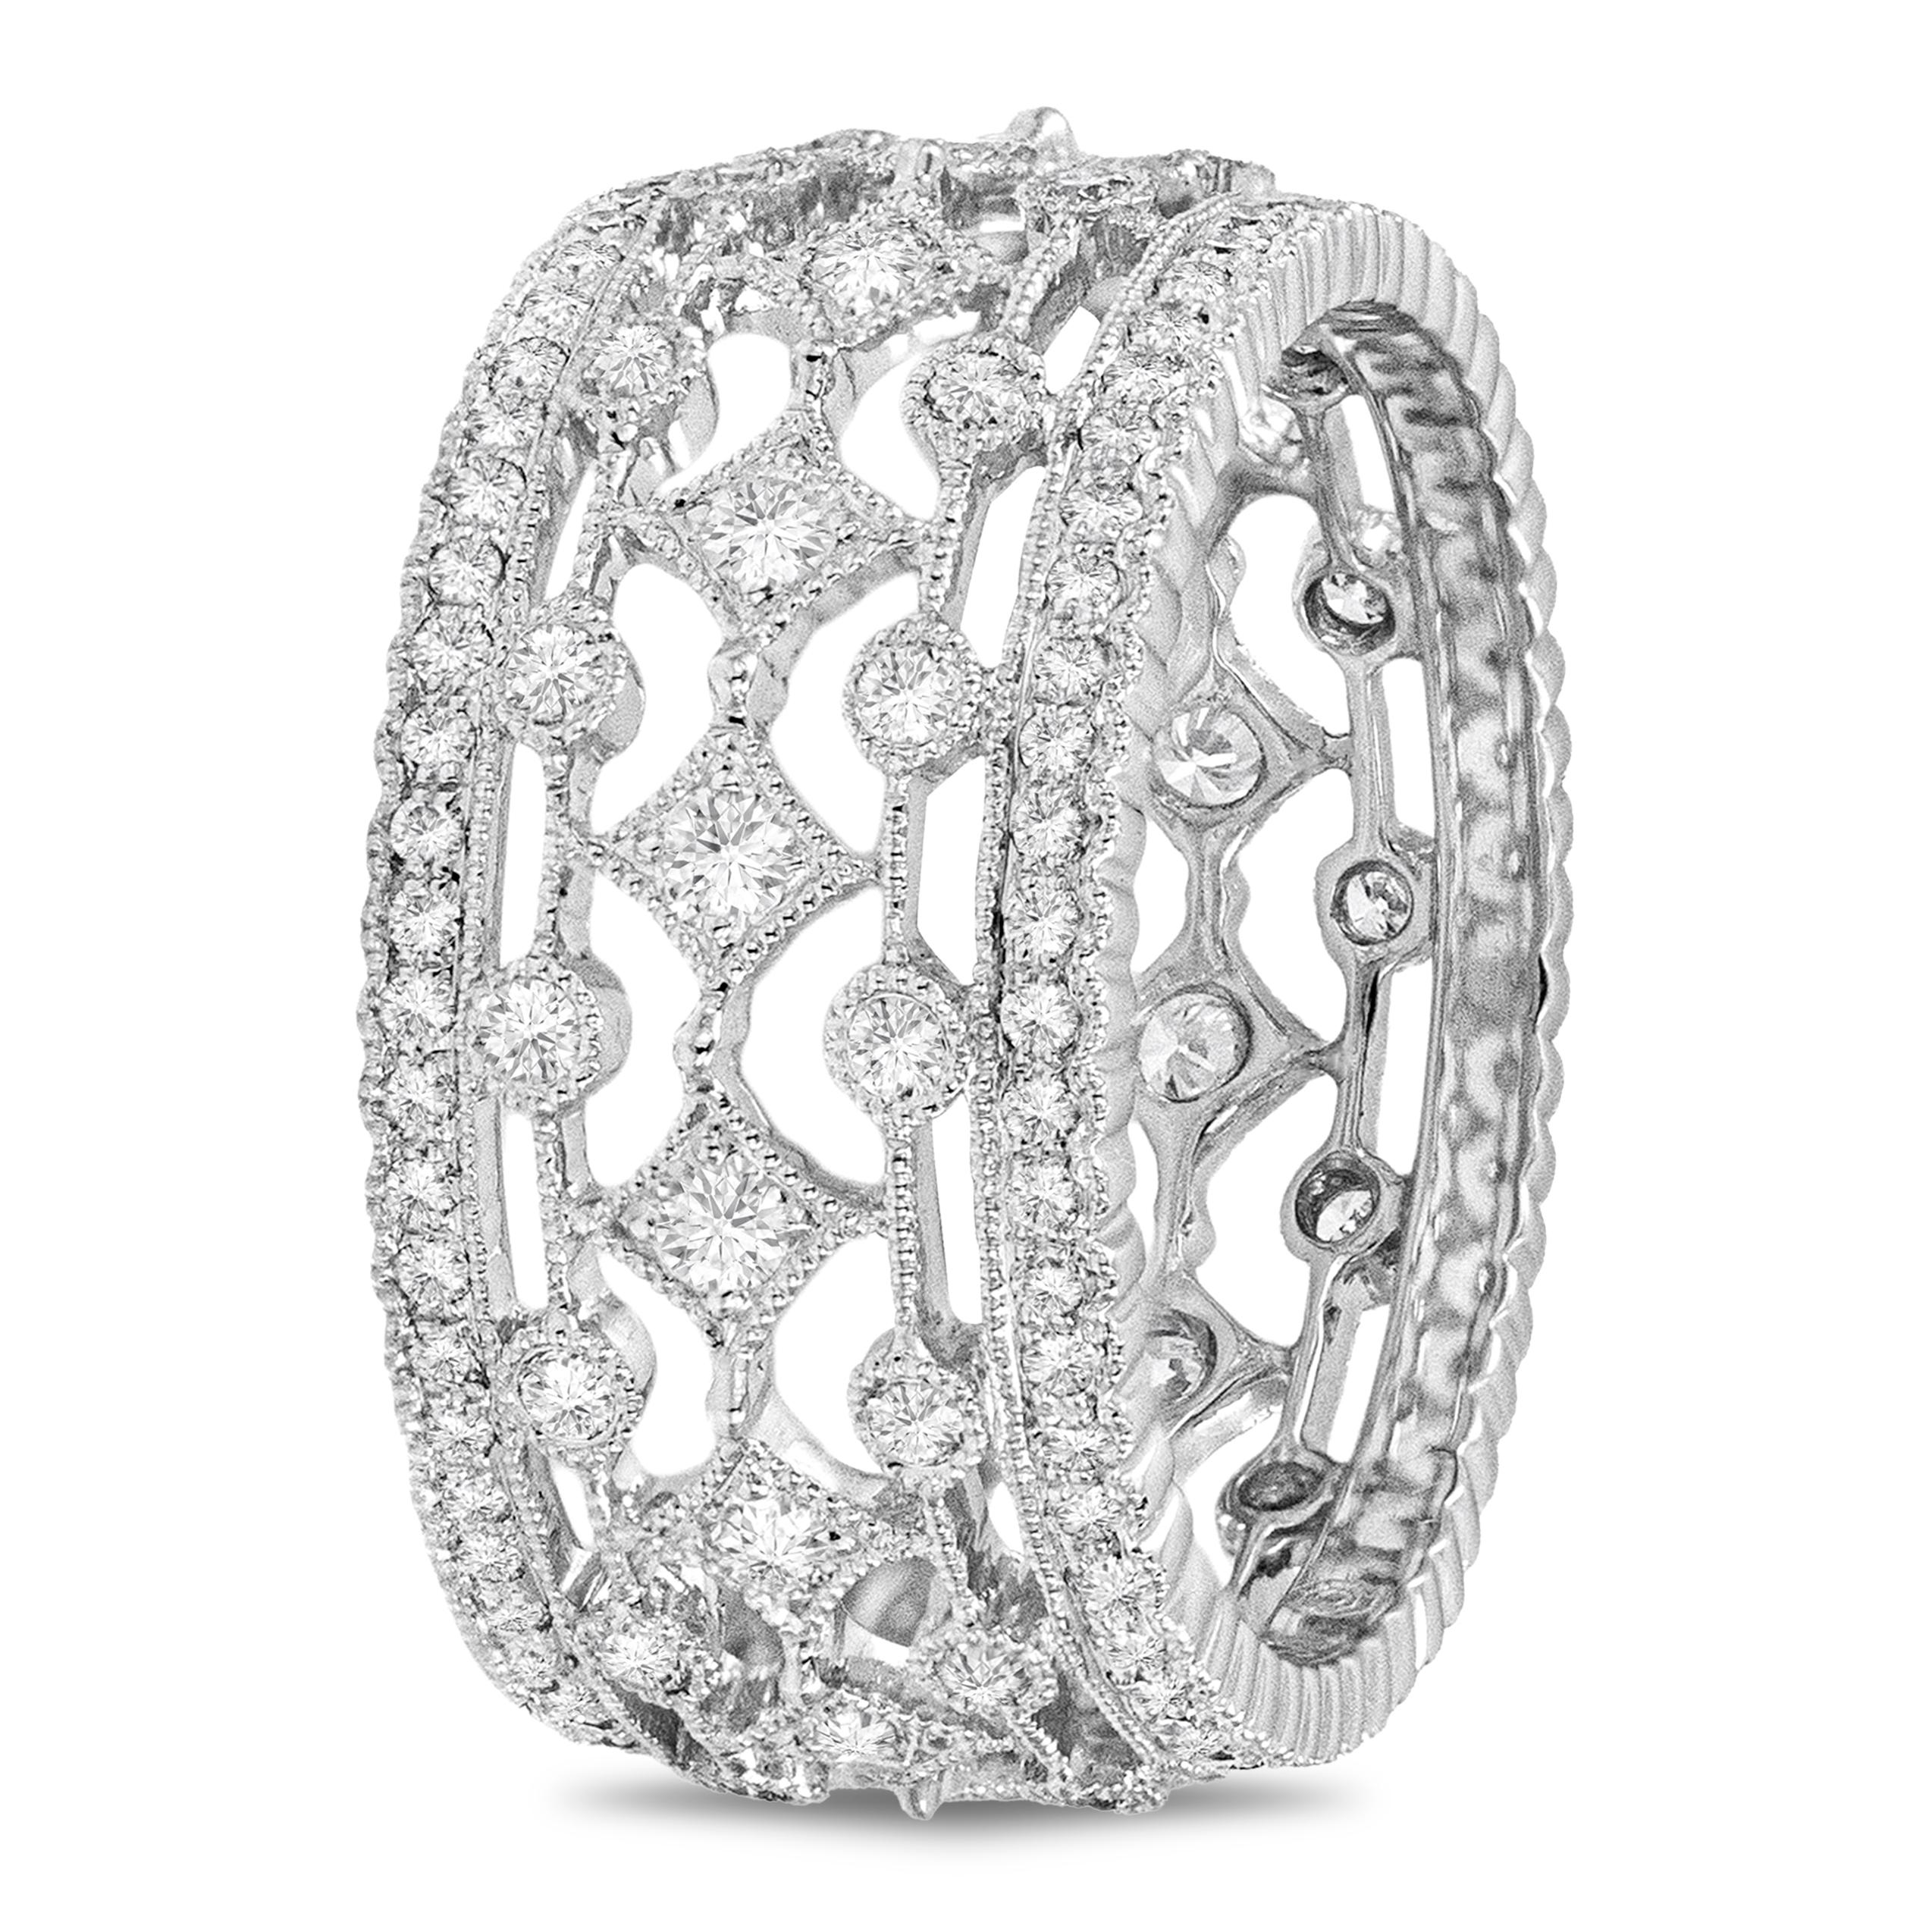 An old fashioned wide wedding band style featuring brilliant round diamonds set in an intricate open work design. Diamonds weighs 1.04 carats total, Made in 18K White Gold. Size 6.25 US. 

Roman Malakov is a custom house, specializing in creating